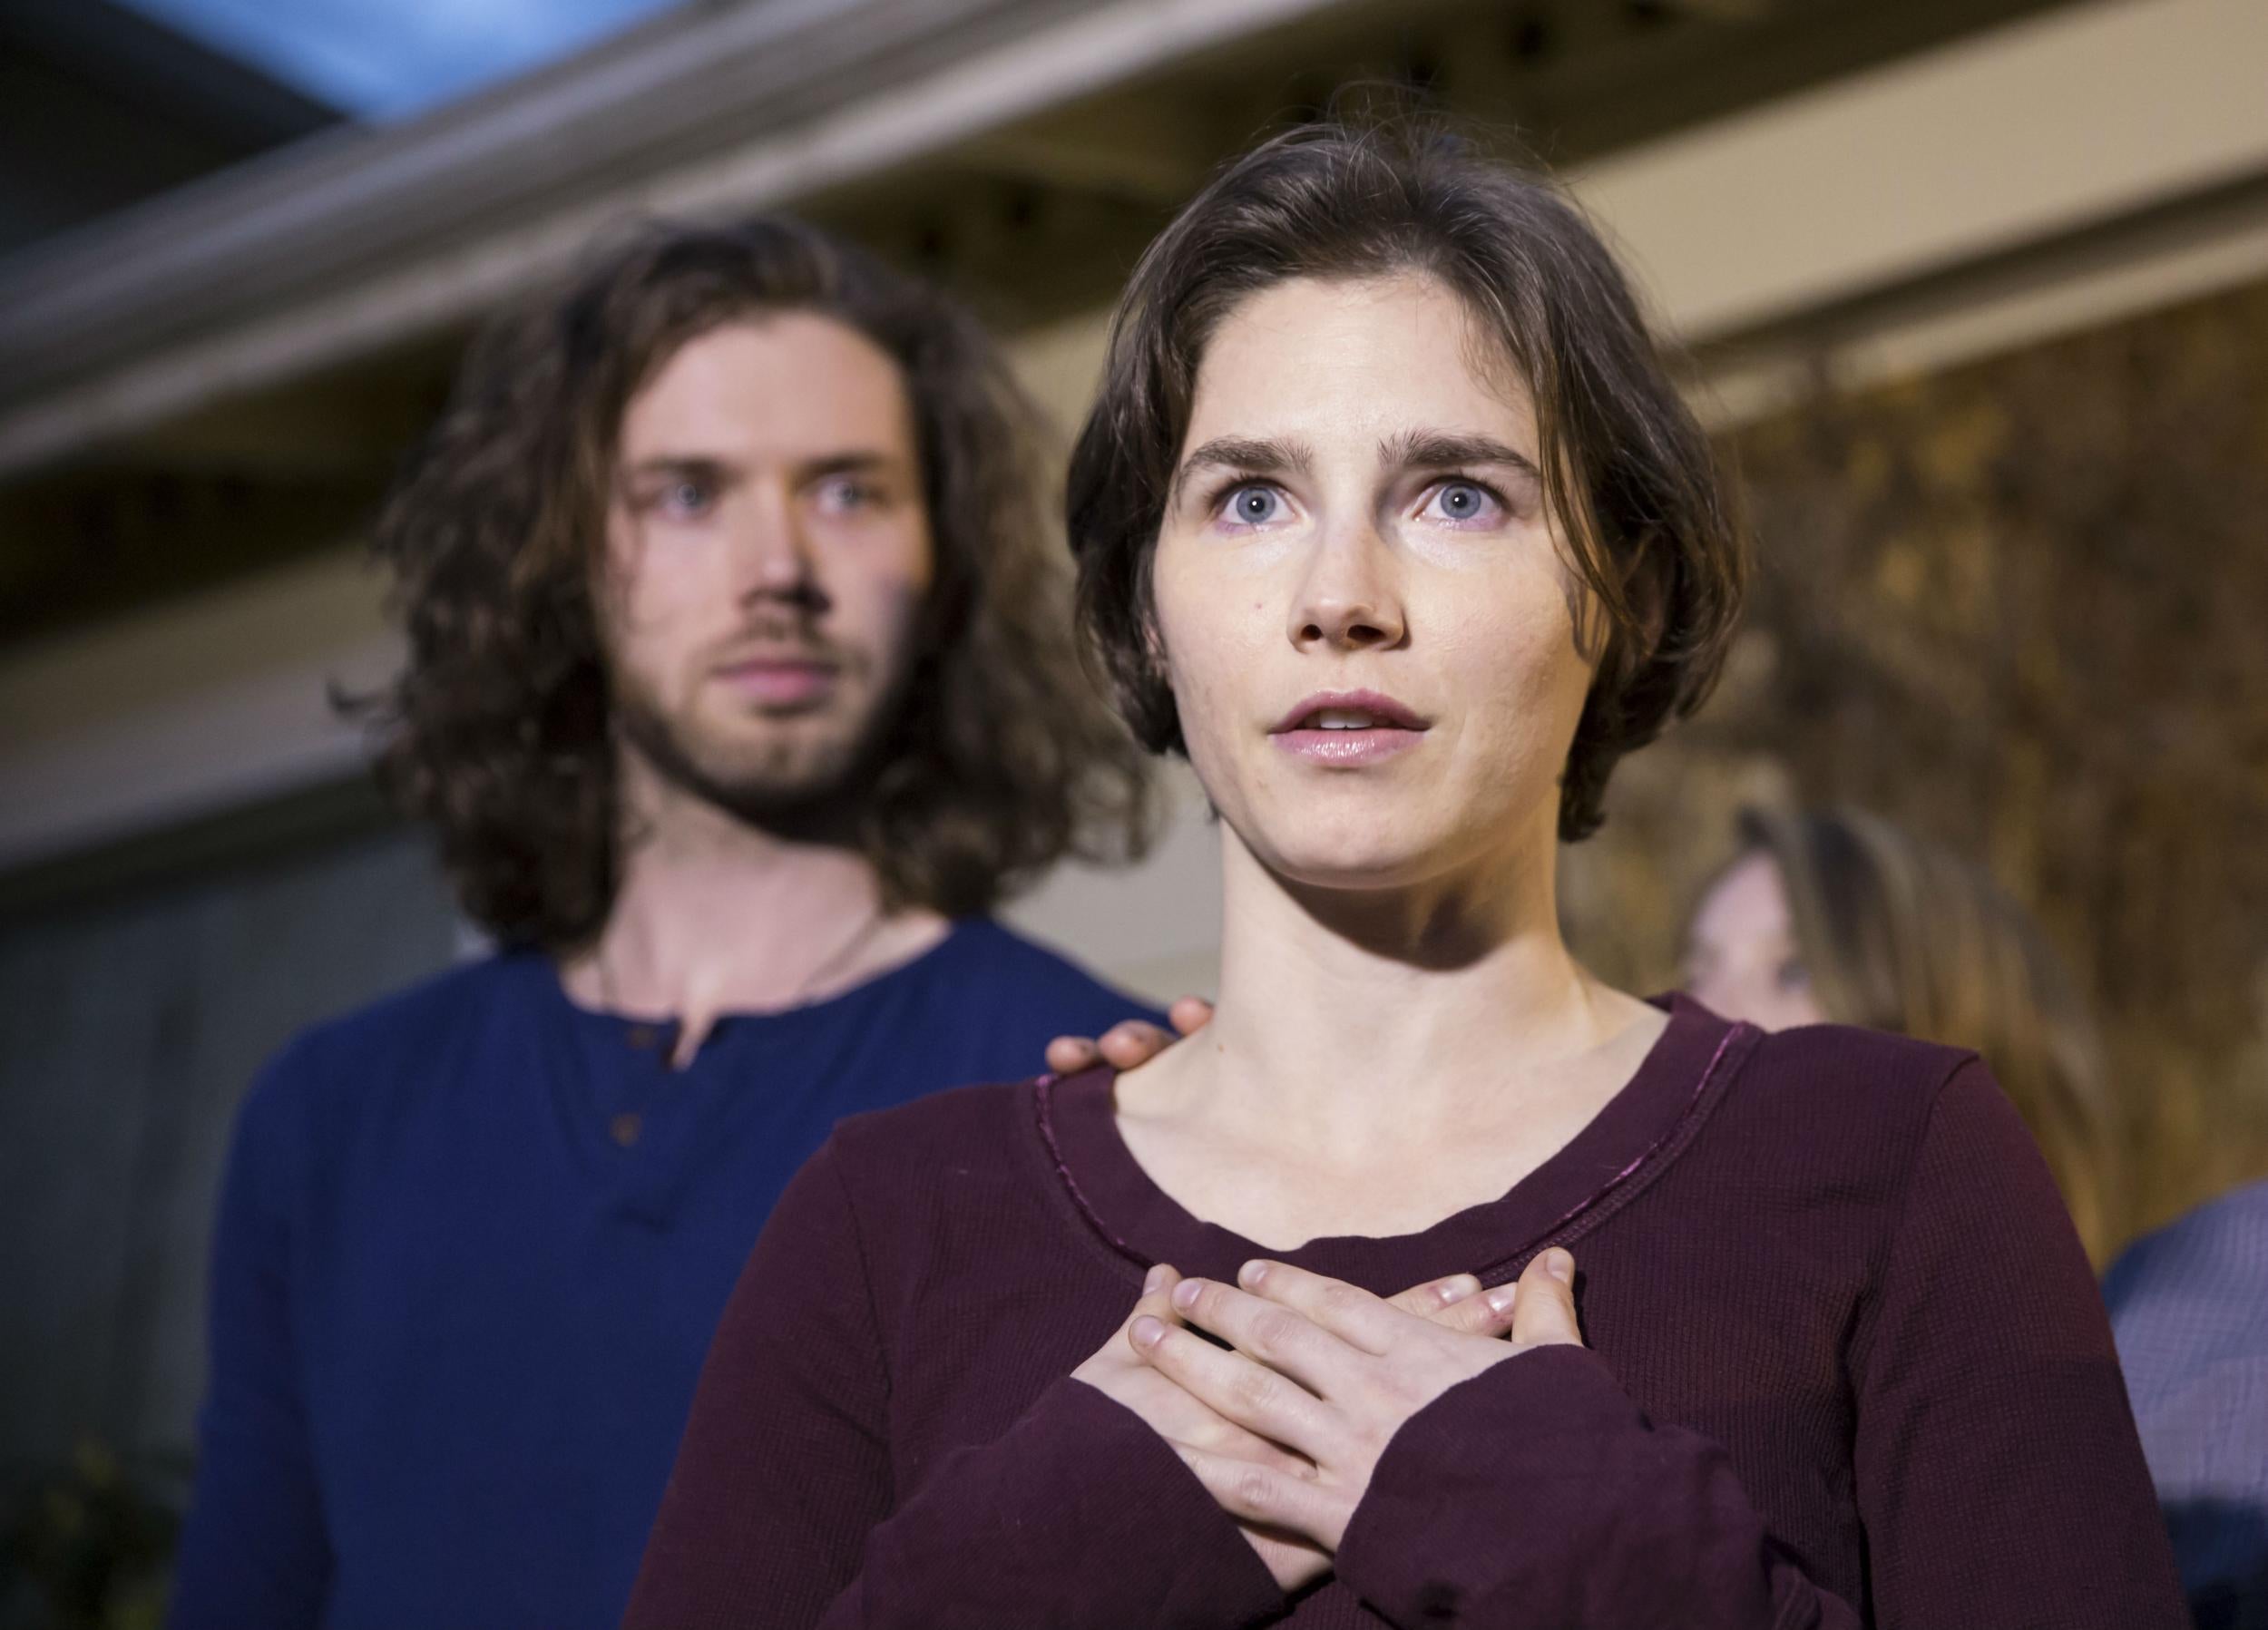 Amanda Knox was cleared in 2015 of the 2007 murder of British student Meredith Kercher